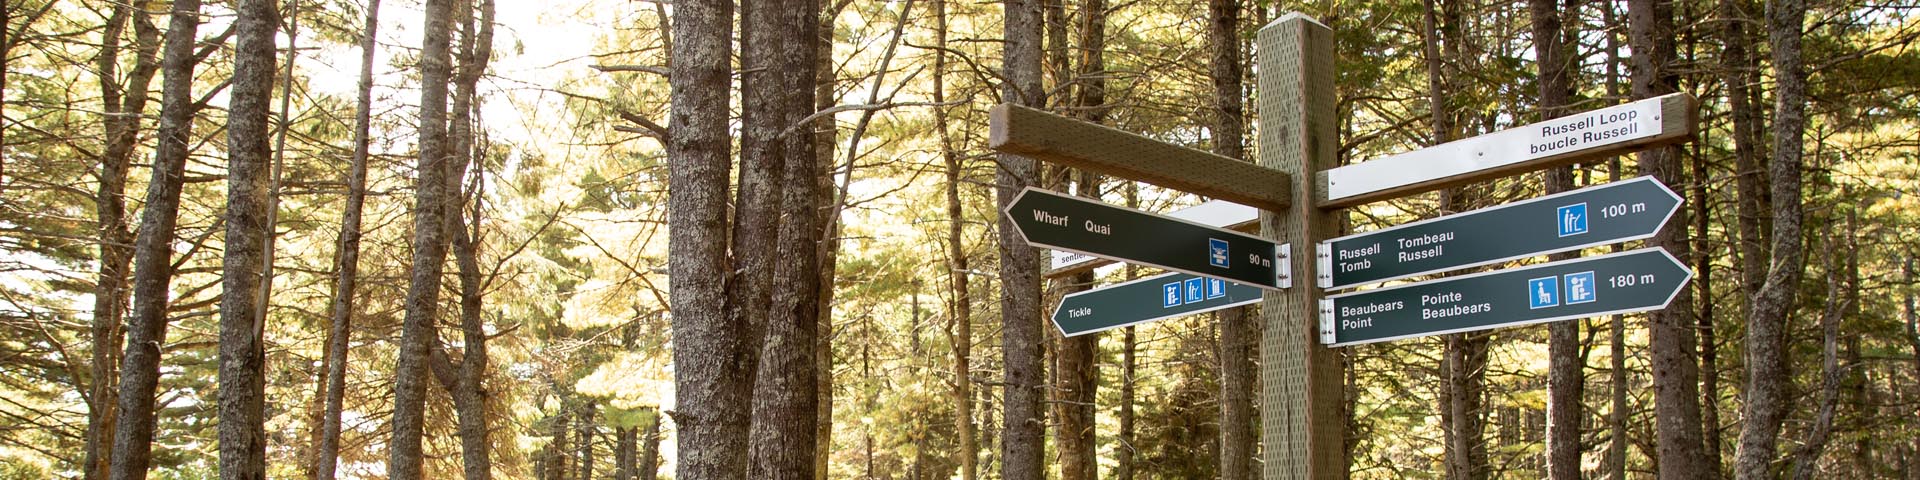 A directional sign in a trail surrounded by trees.